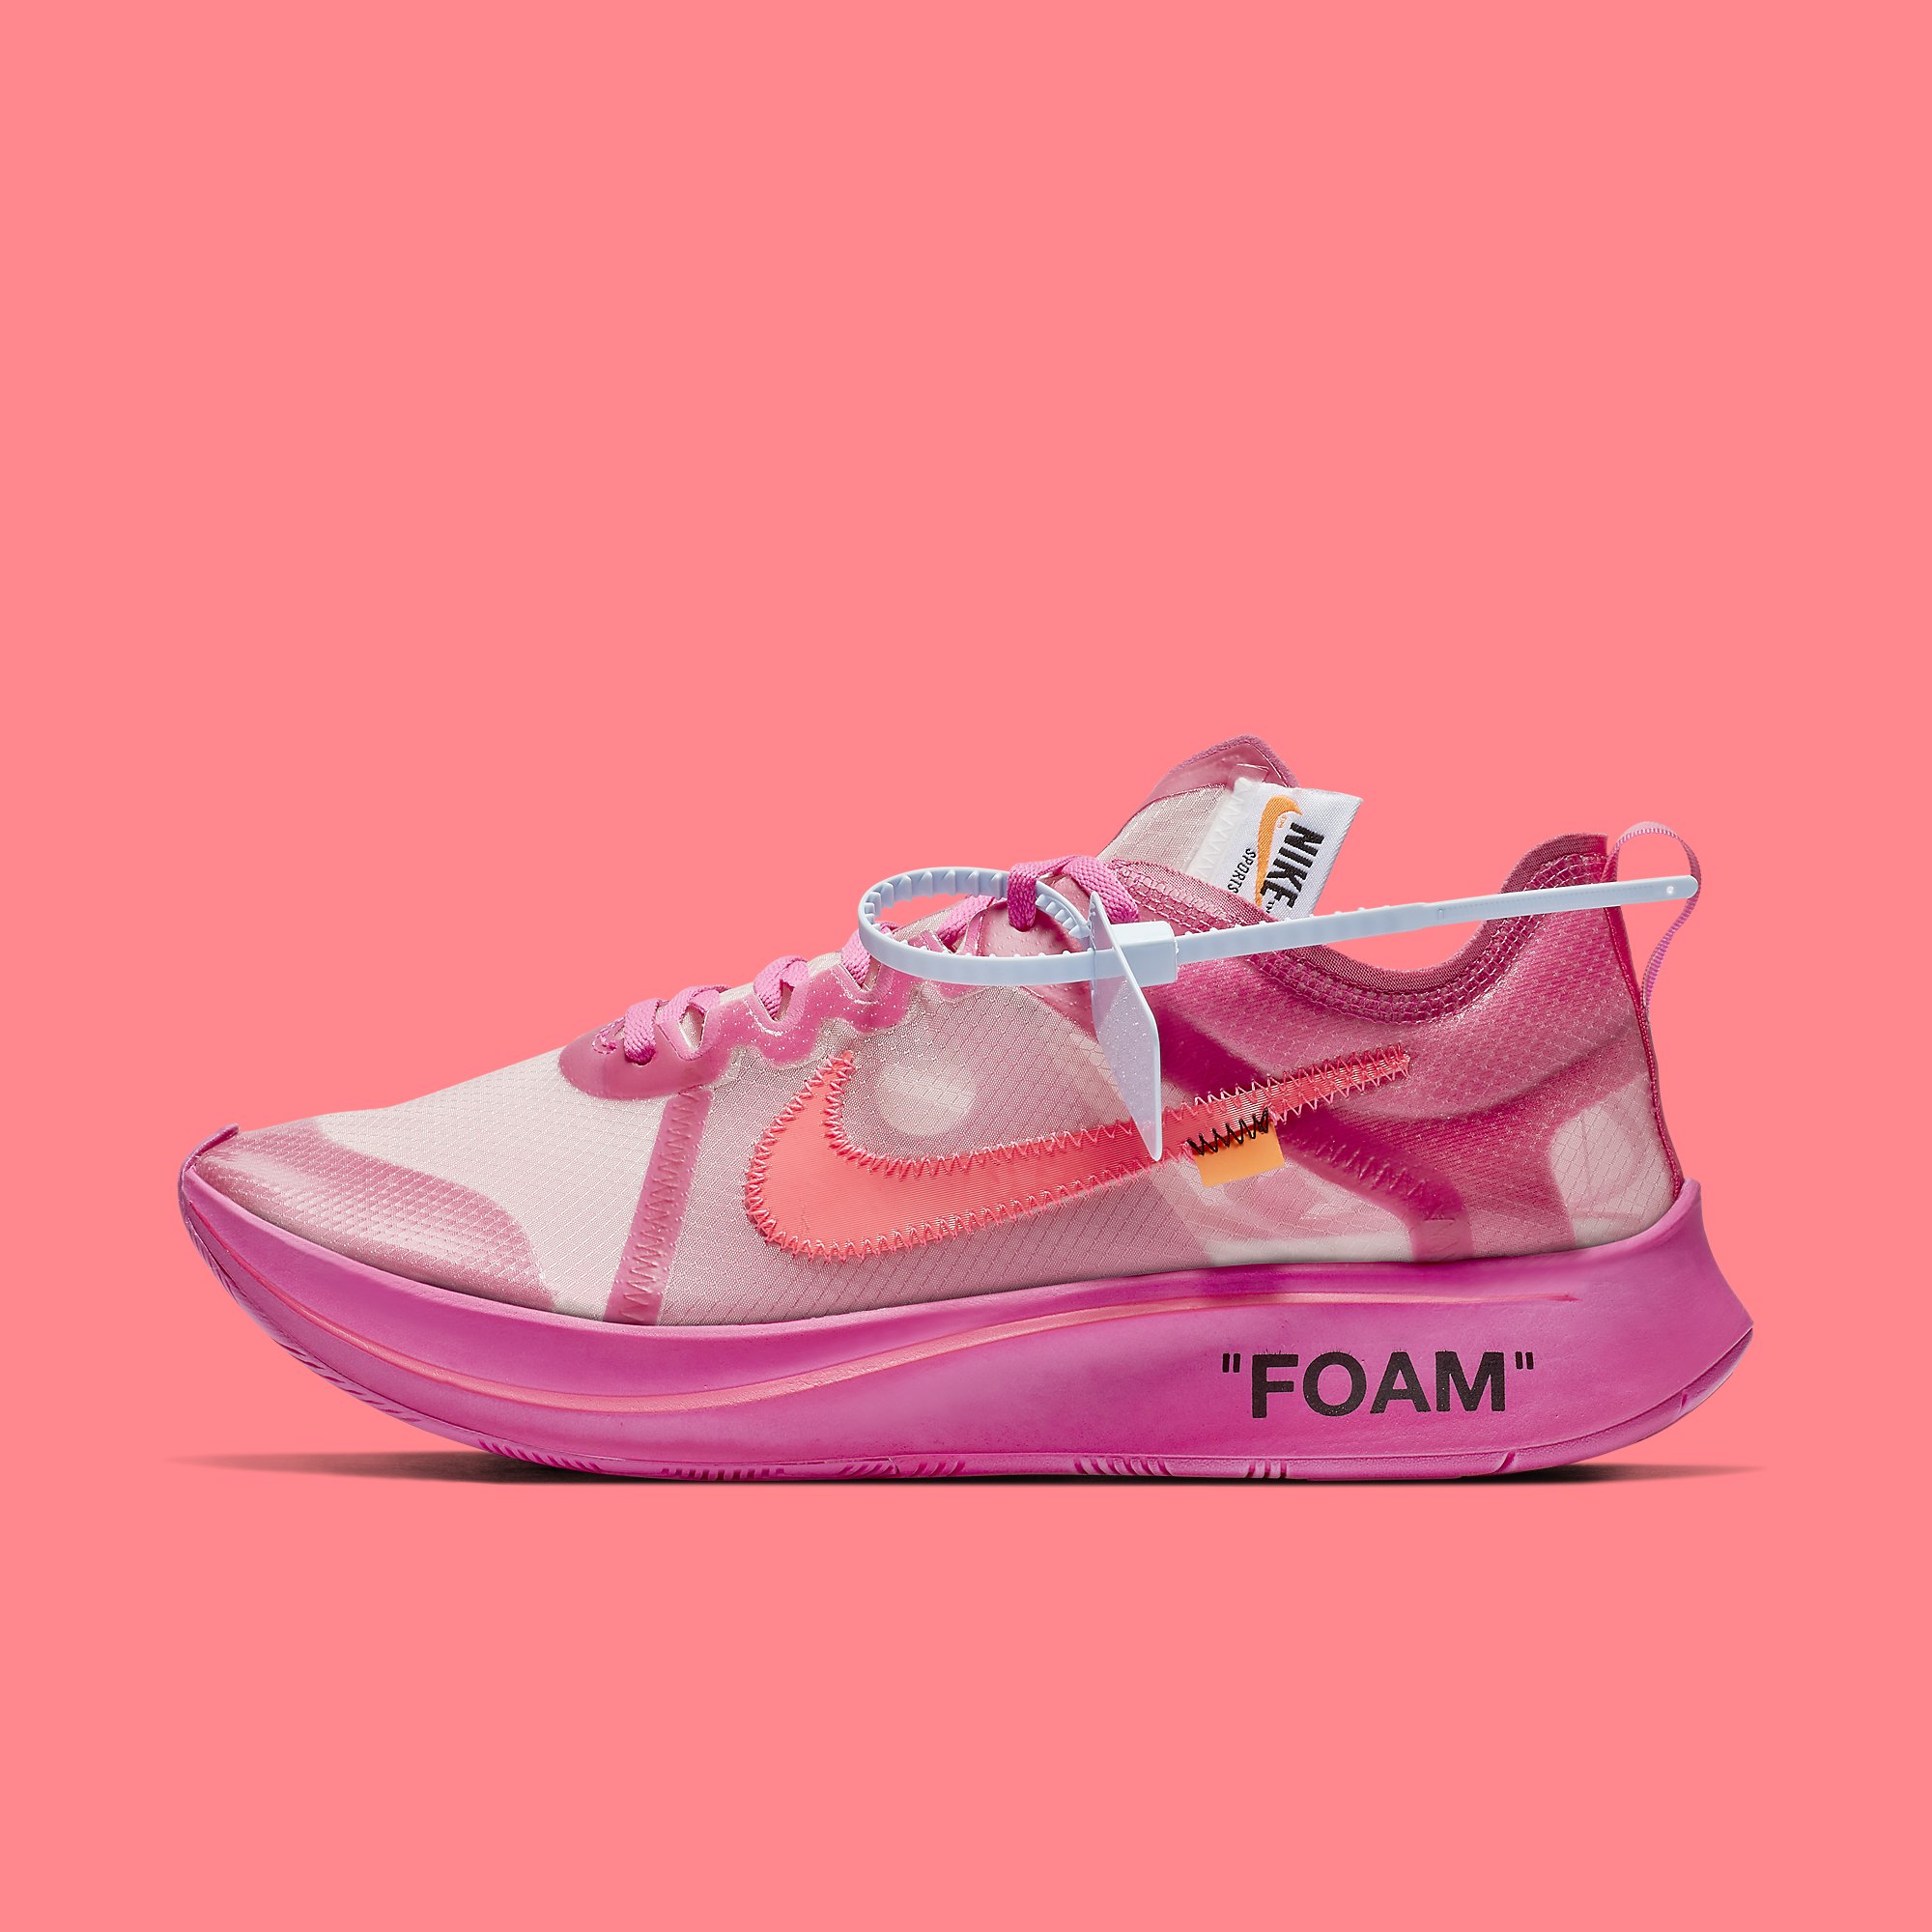 off white nike zoom fly tulip pink aj4588 600 lateral